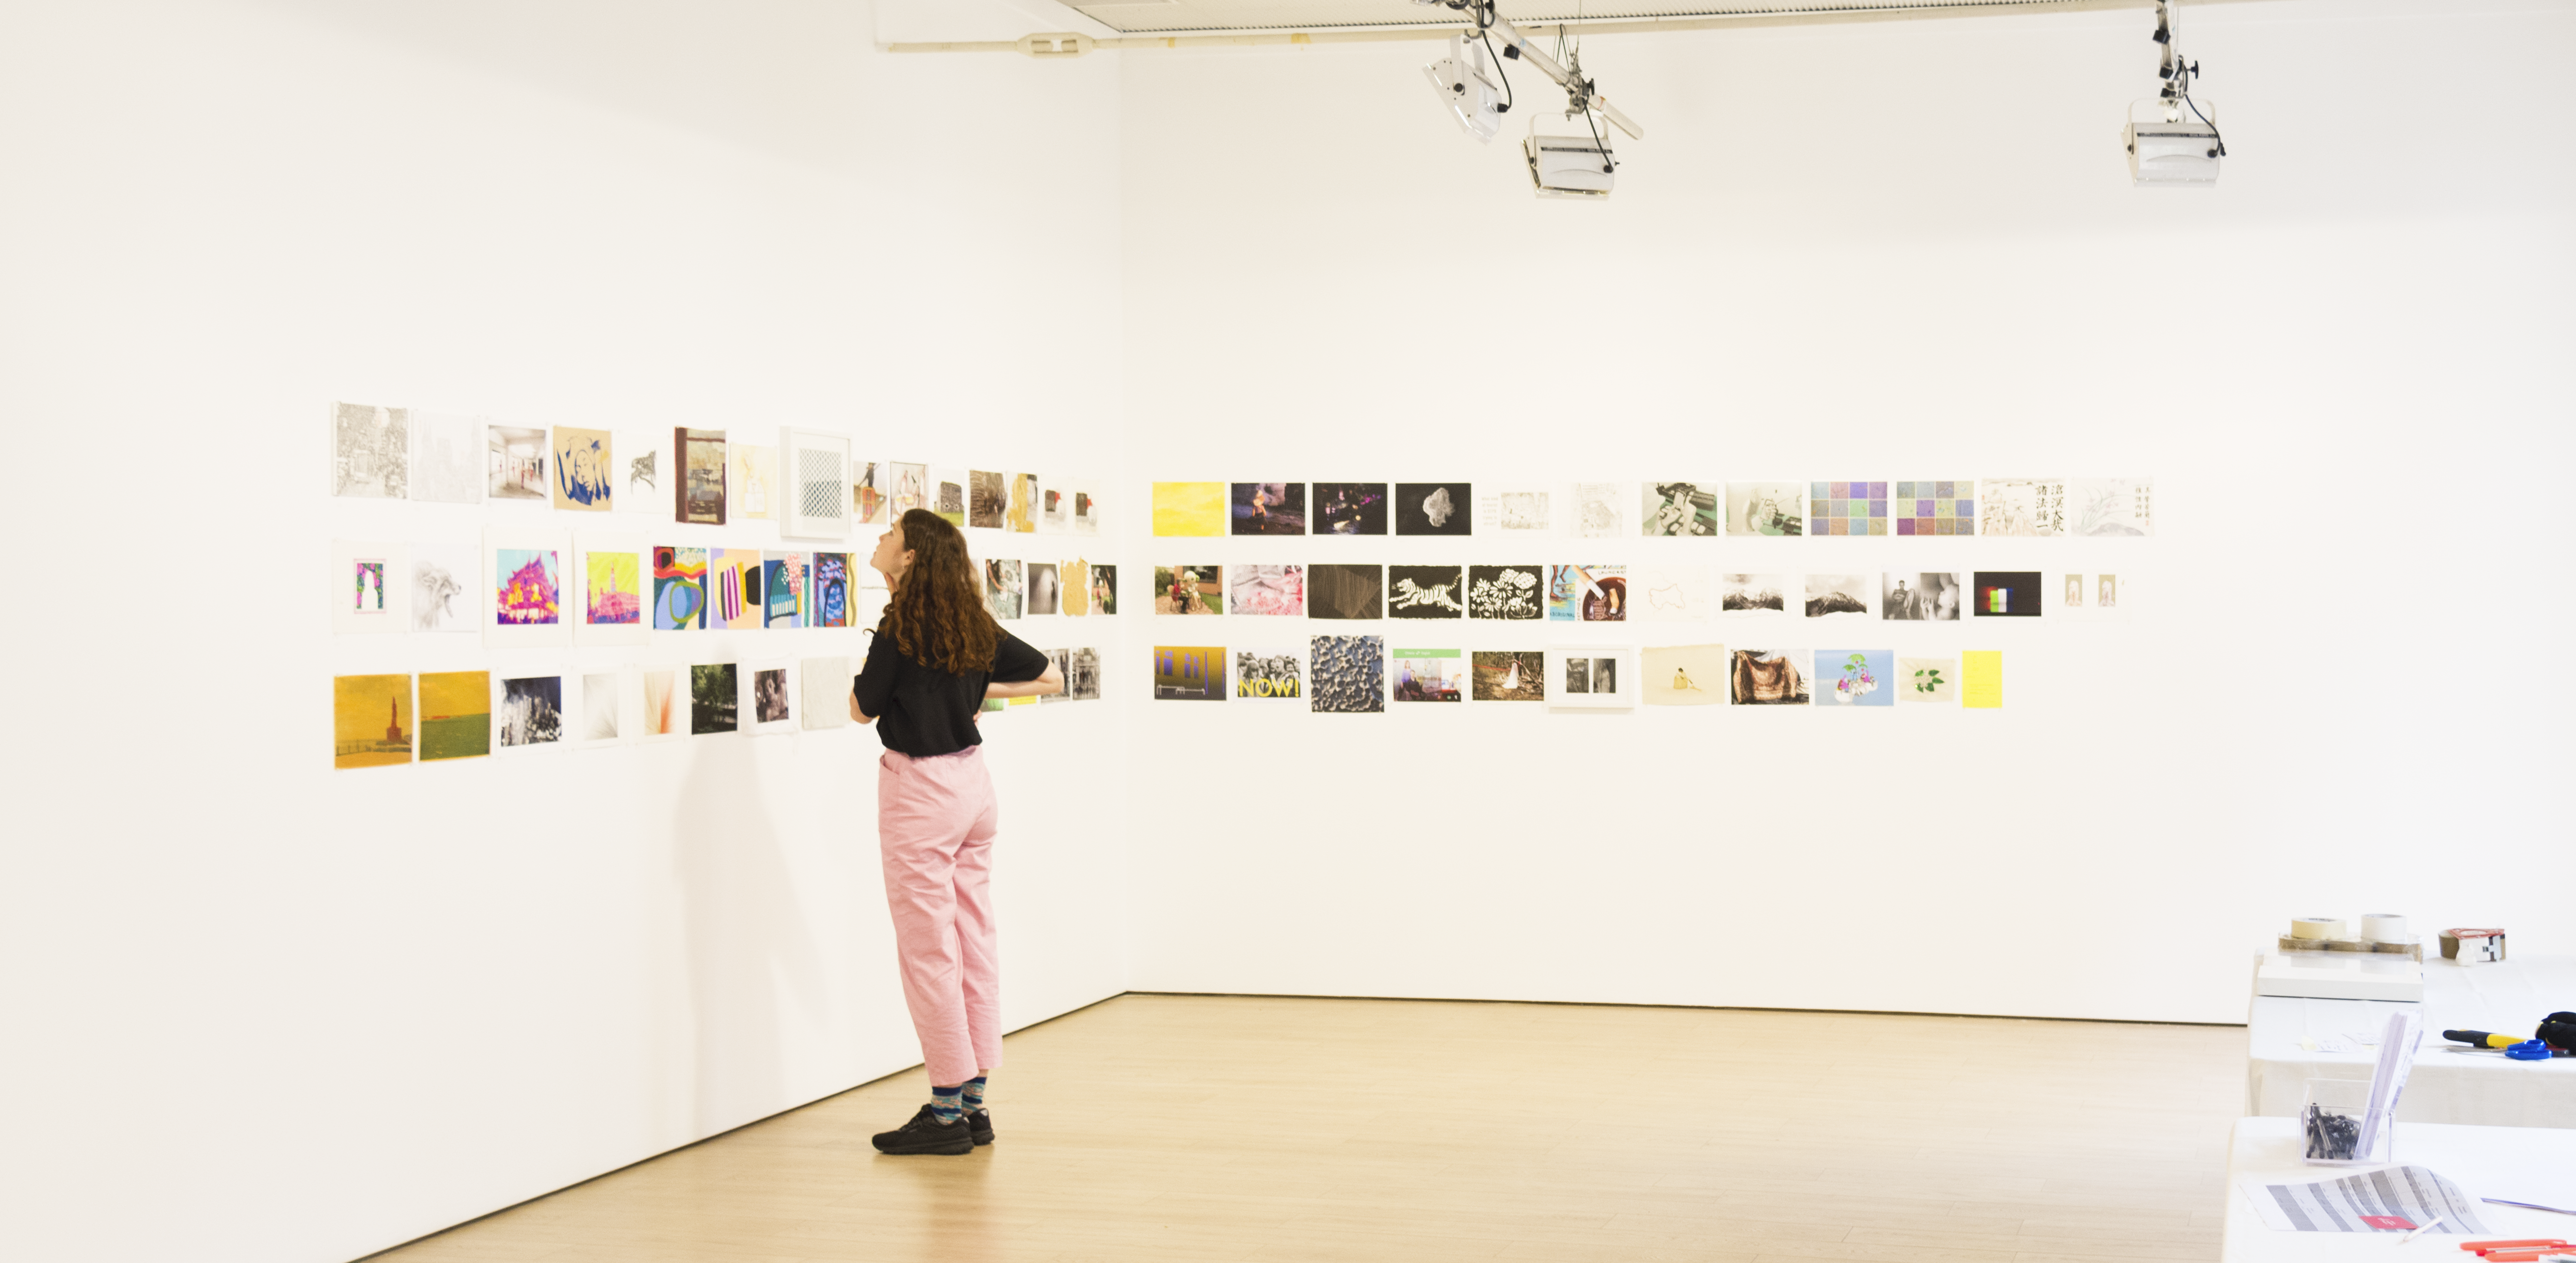 A woman with curly brown hair, wearing a black t-shirt, baby pink pants and black sneakers stands in an empty gallery, looking at a wall of A4-sized illustrations, paintings and designs.